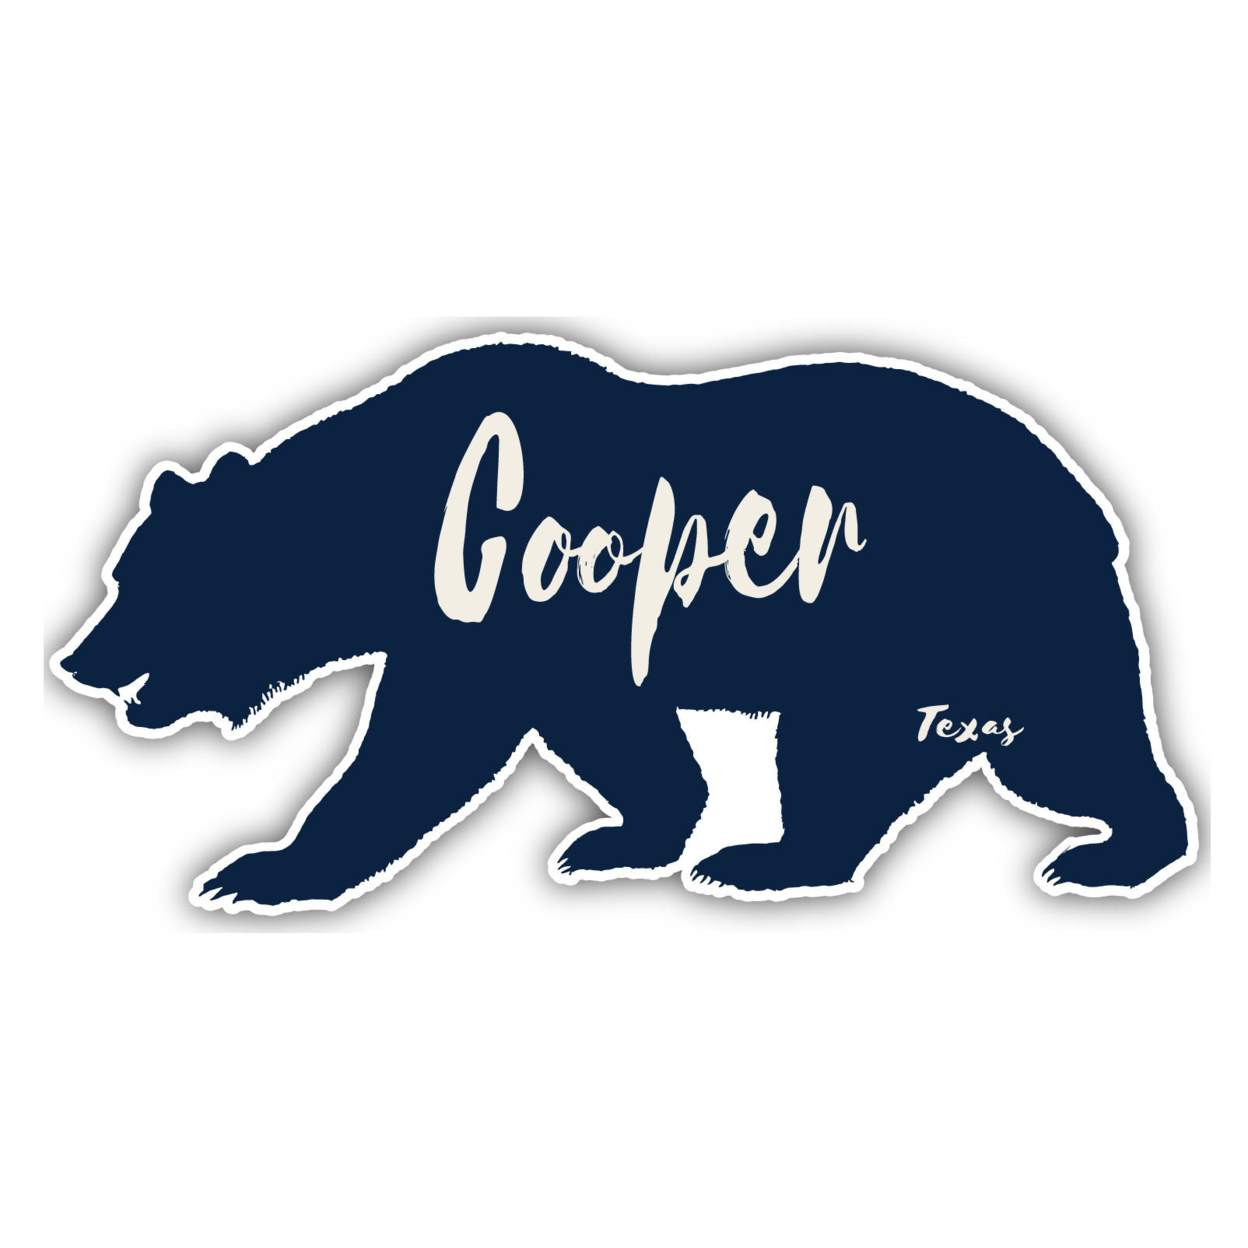 Cooper Texas Souvenir Decorative Stickers (Choose Theme And Size) - 4-Pack, 8-Inch, Bear